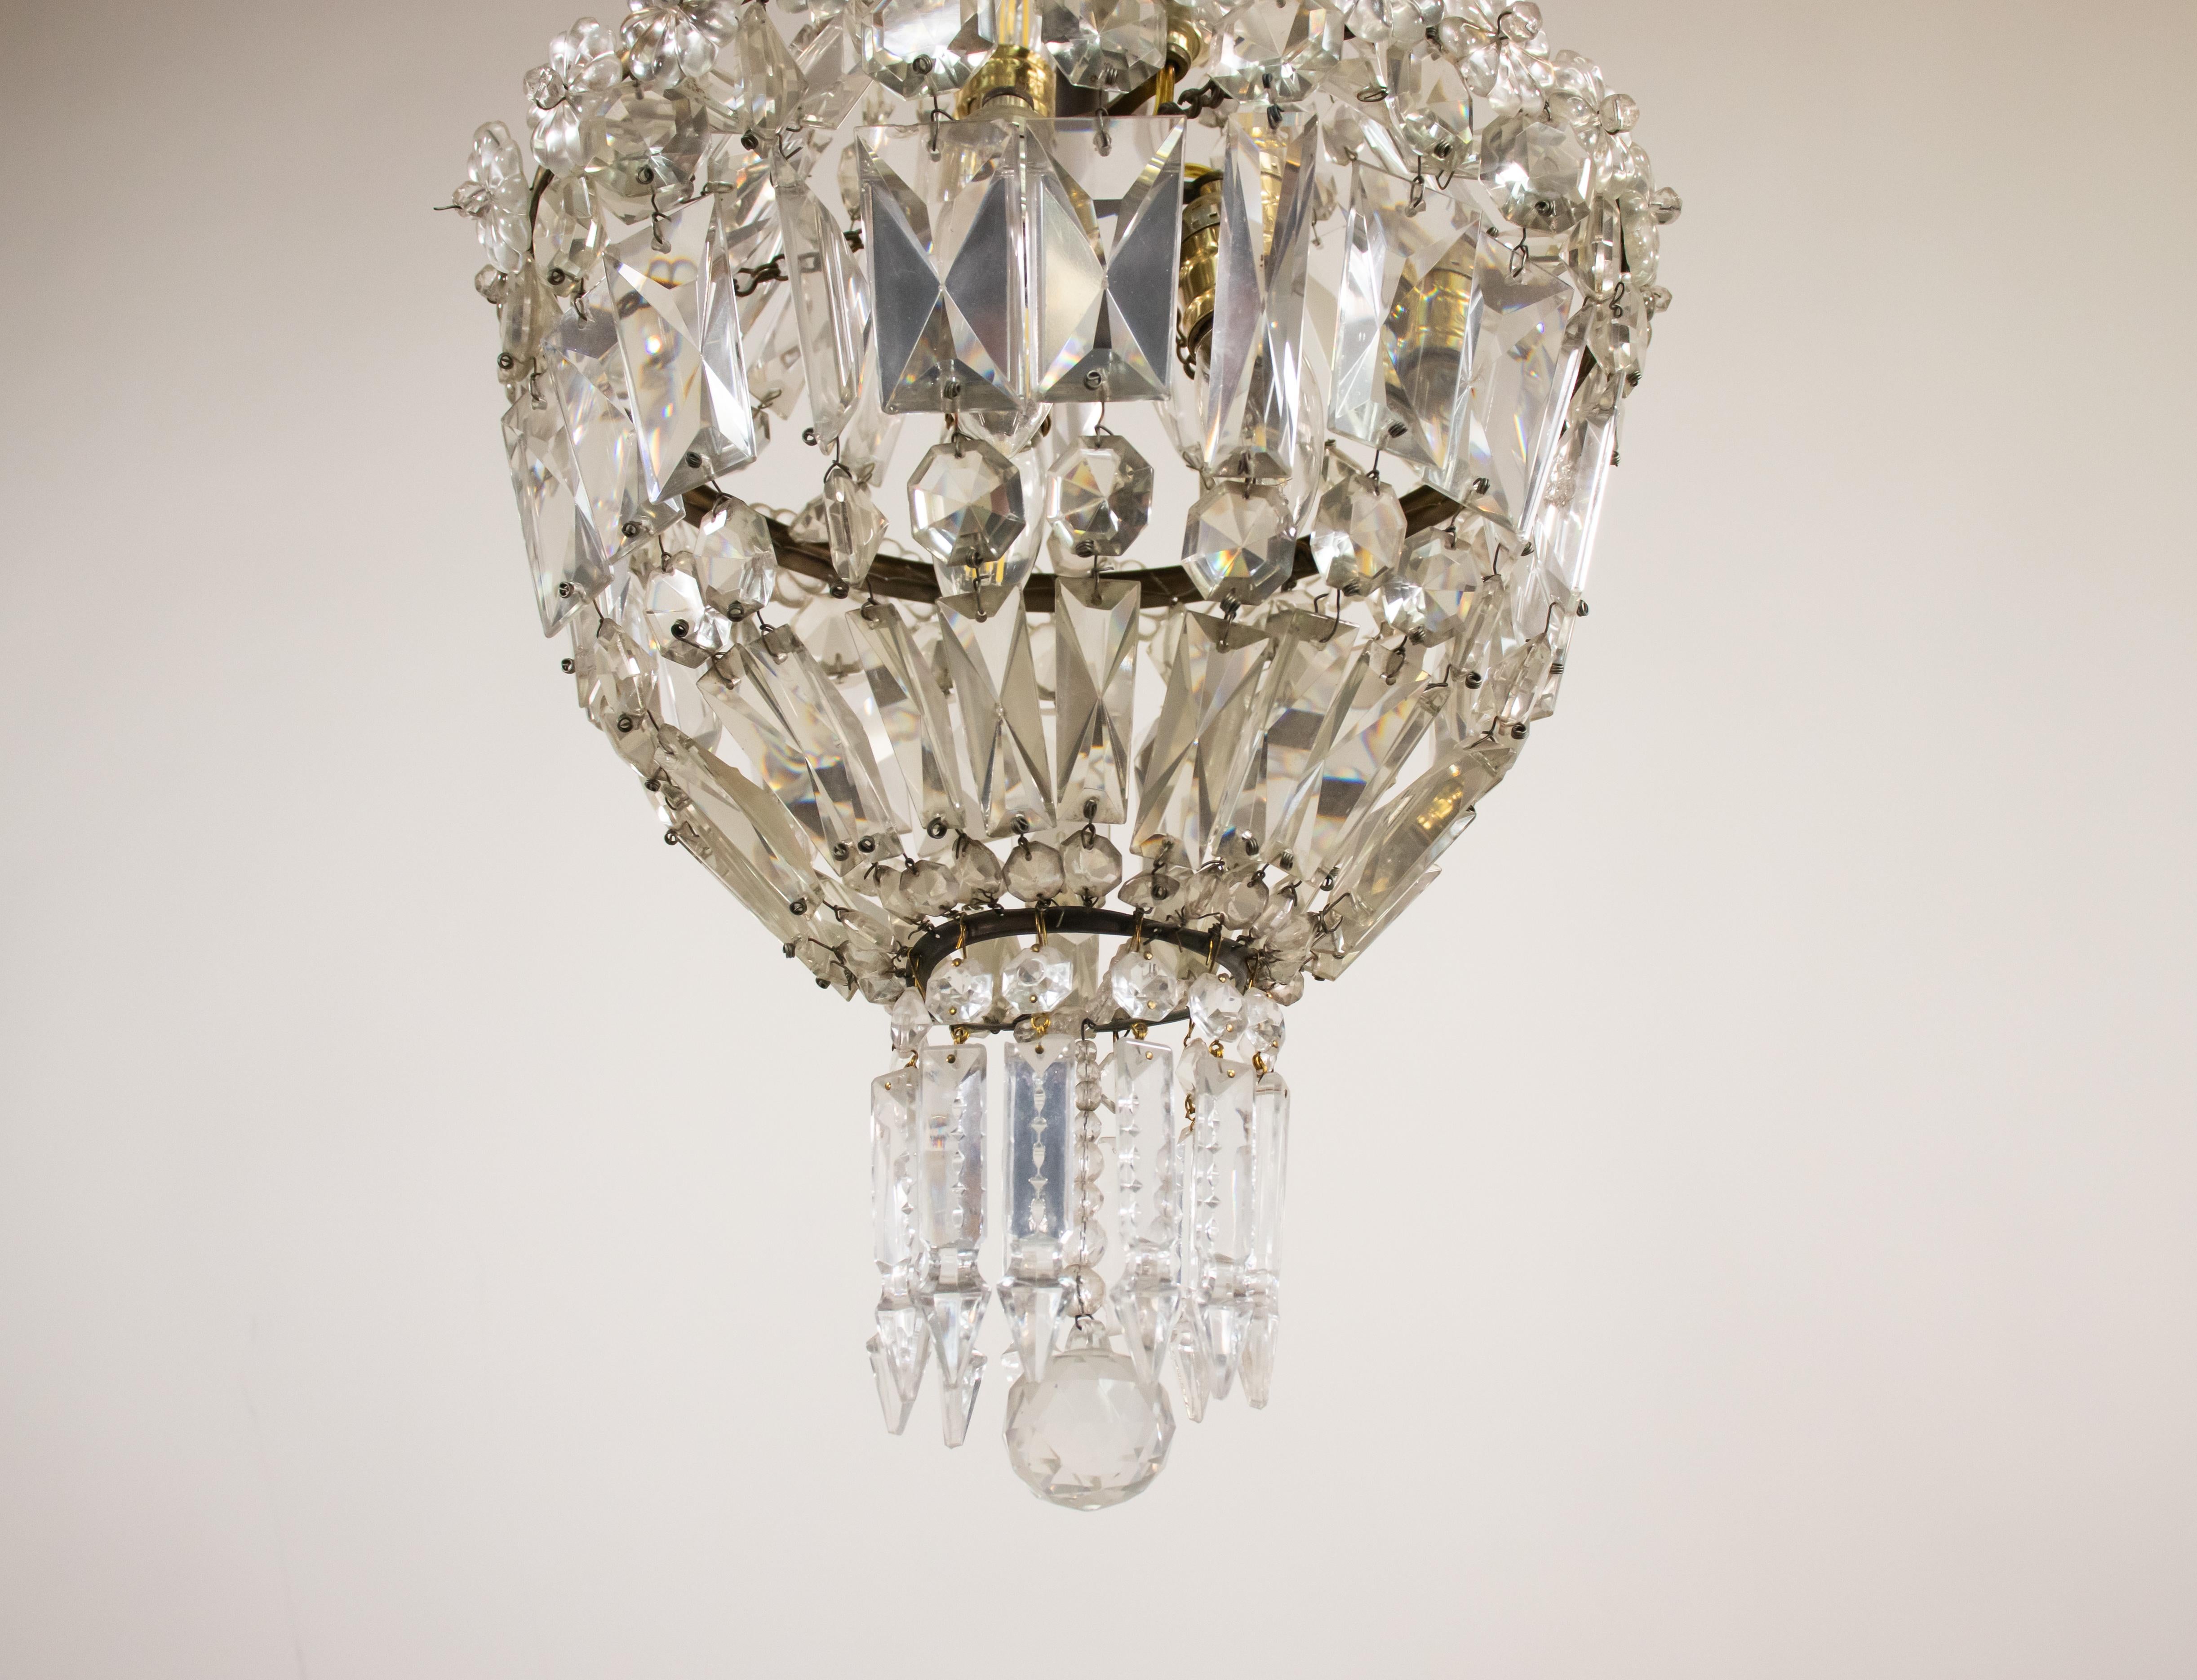 Early 20th Century French Empire Style Crystal Chandelier For Sale 8